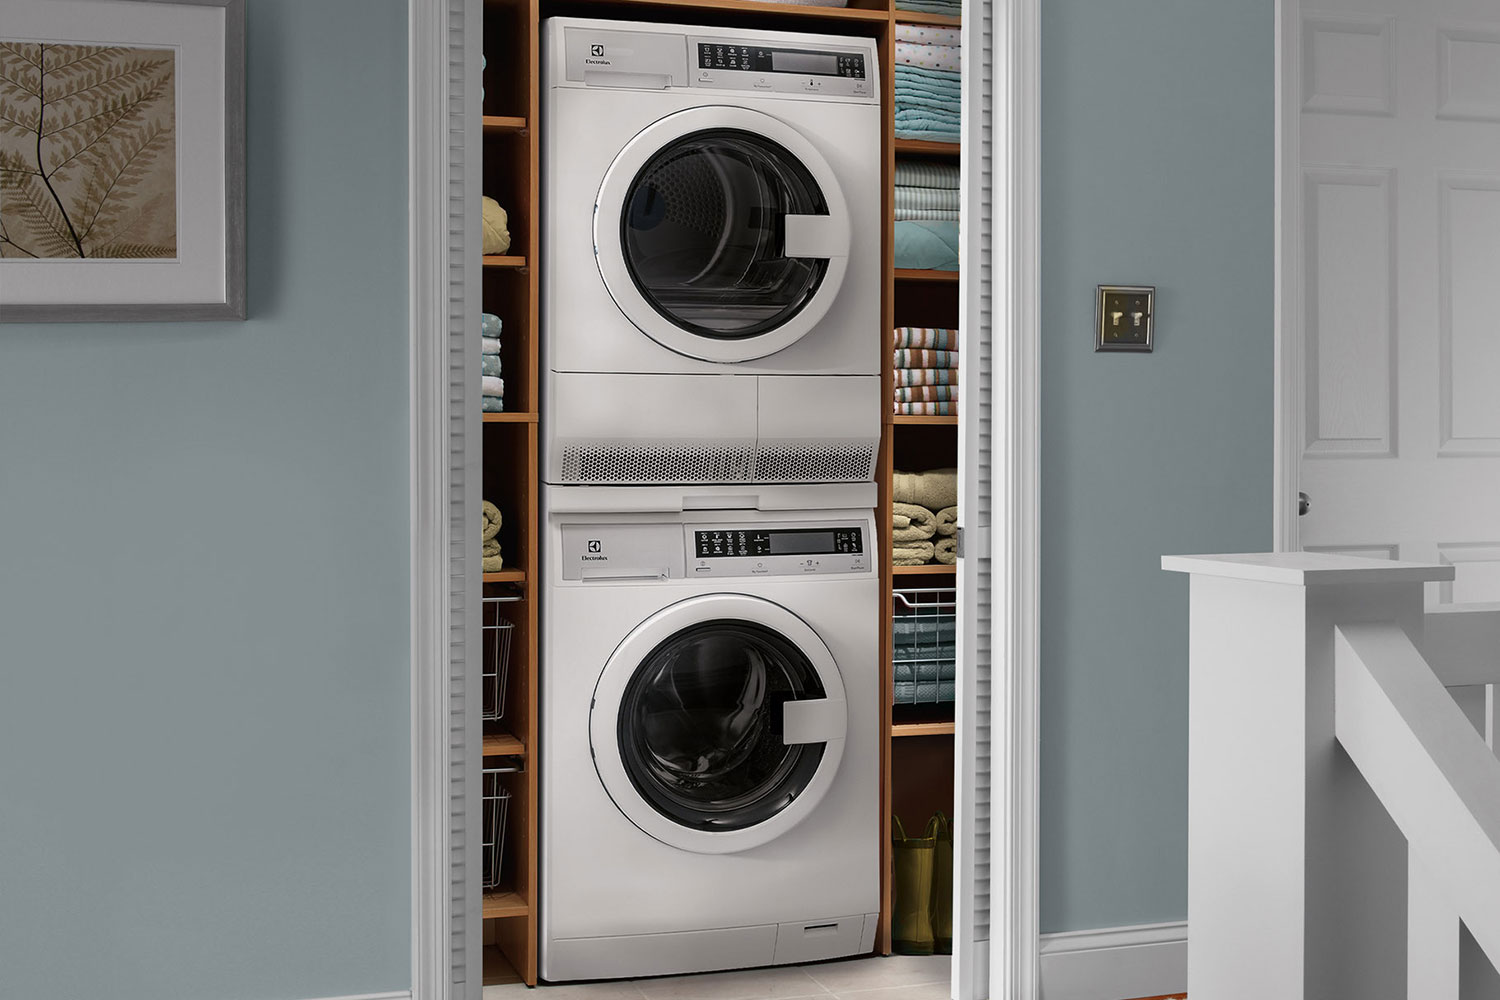 Washer and Dryer Shopping Guide Part 2: A Complete Size Guide